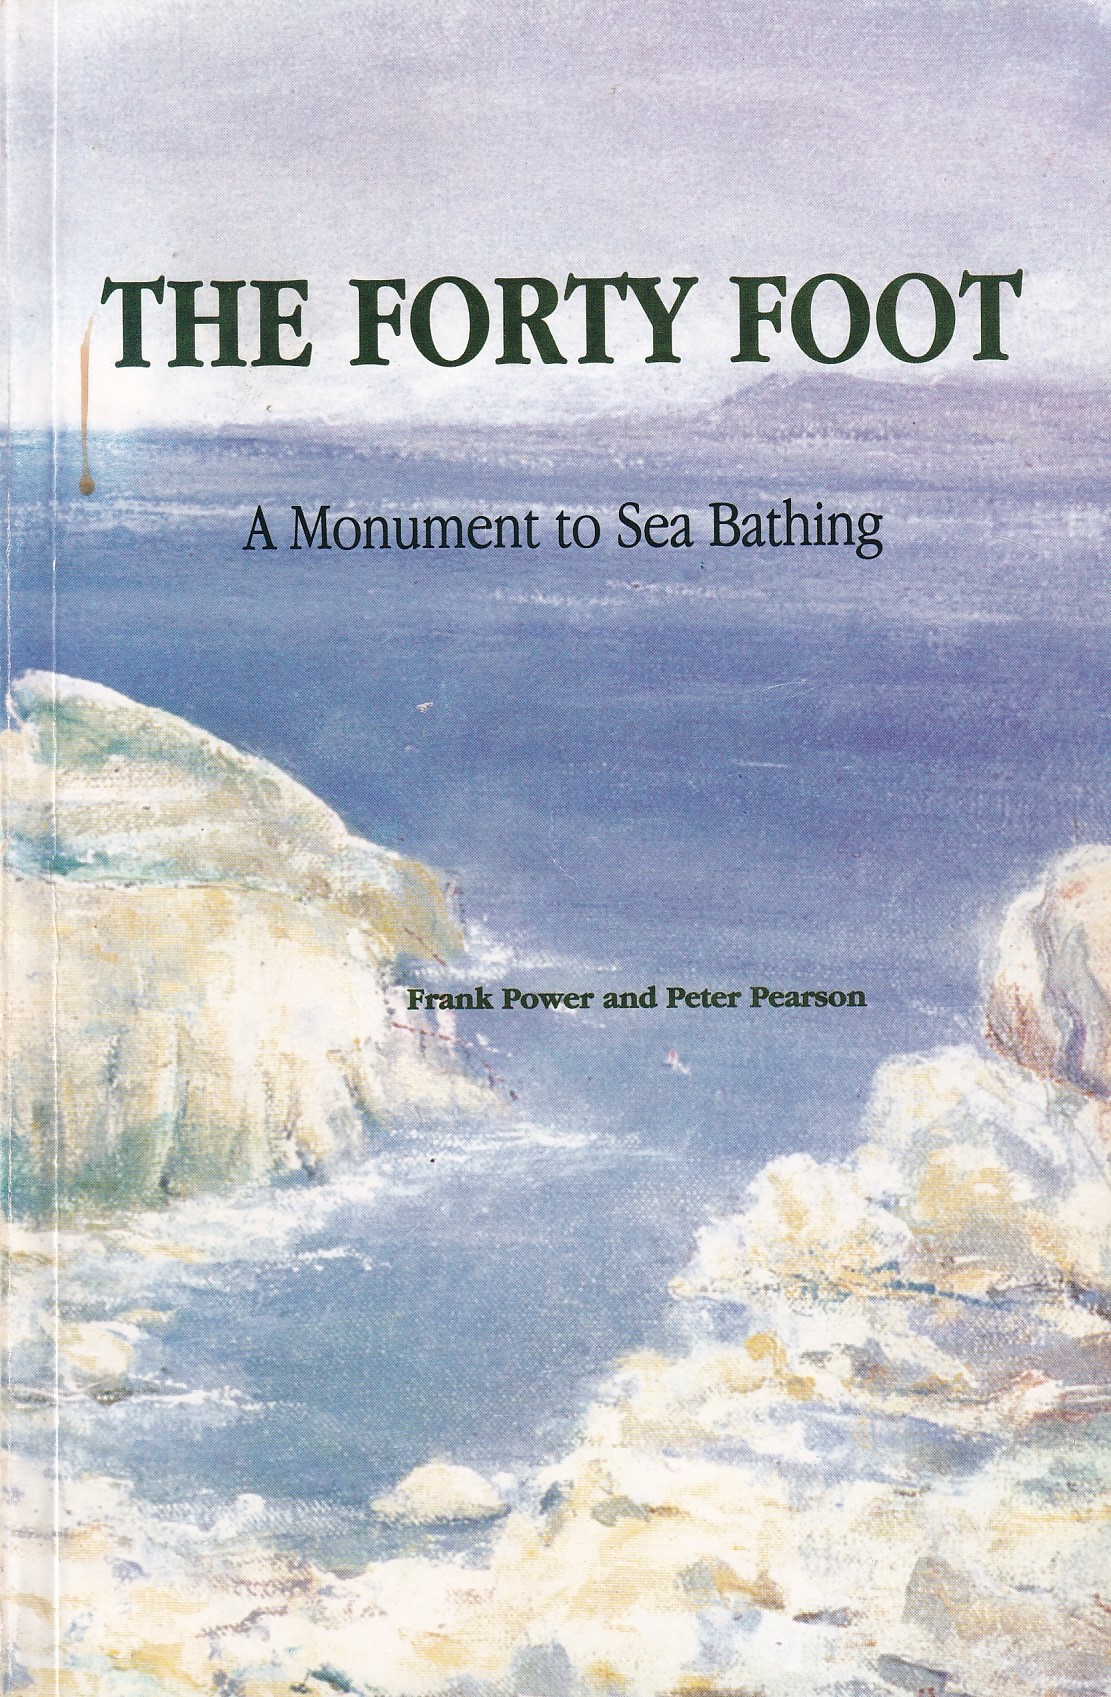 The Forty Foot: a Monument to Sea Bathing | Frank Power and Peter Pearson | Charlie Byrne's